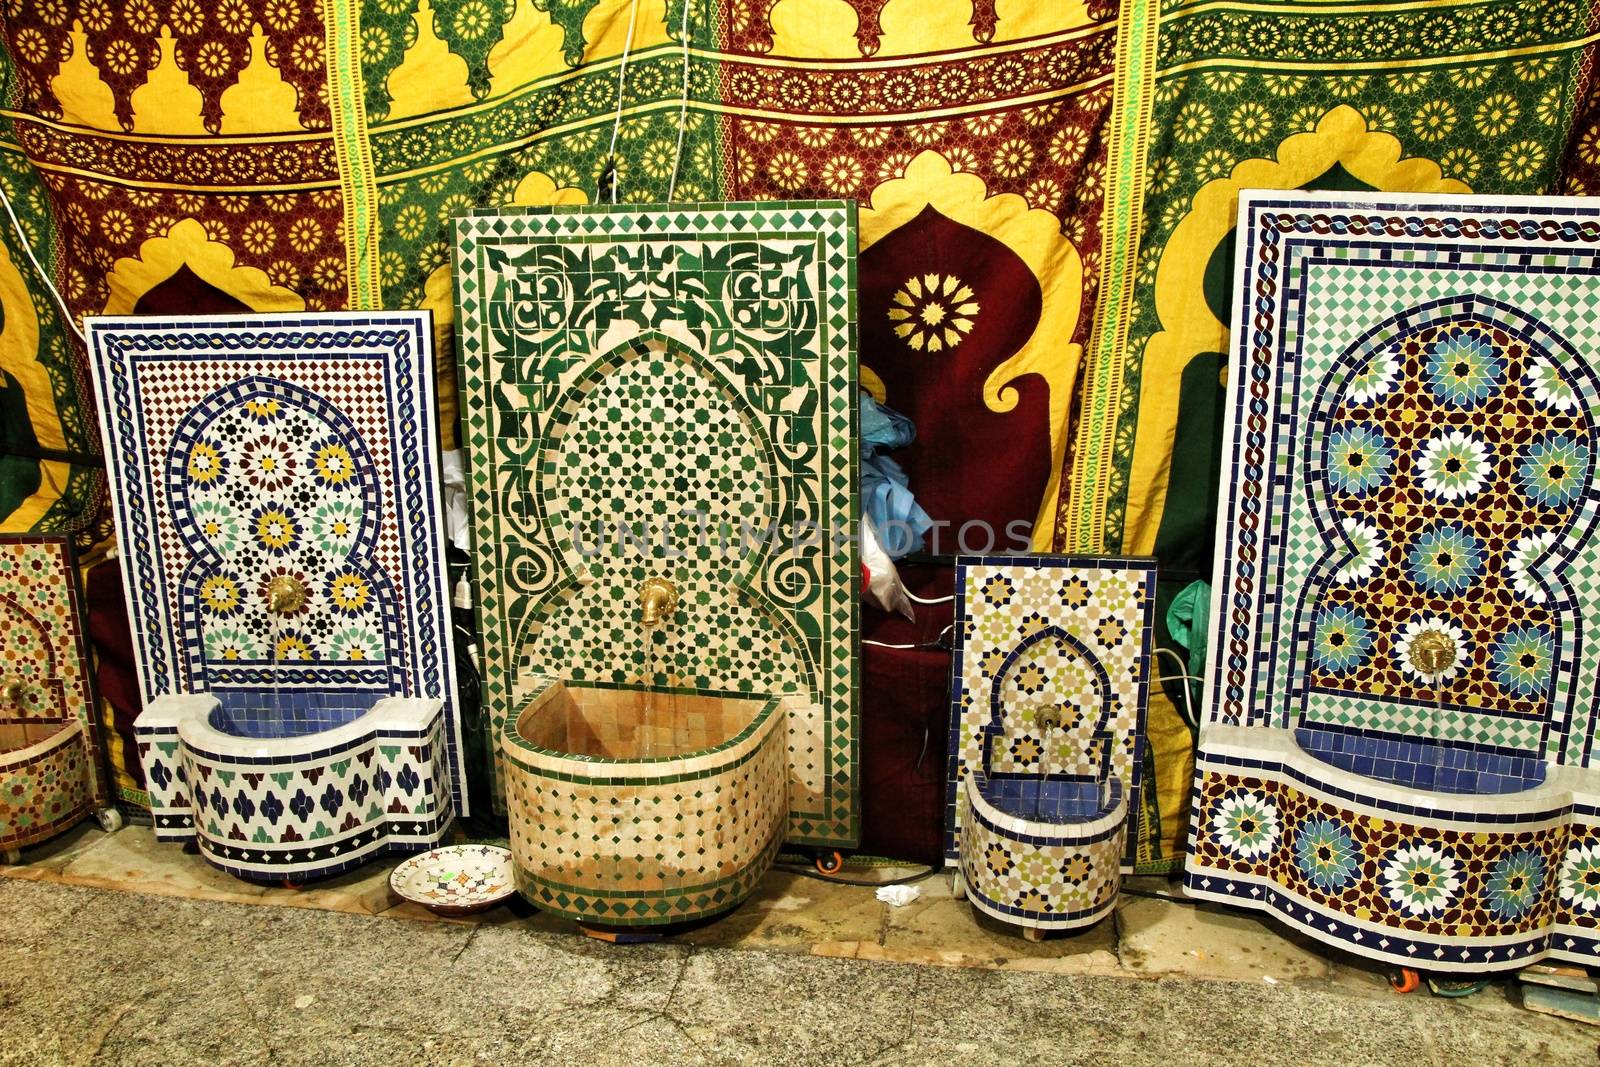 Ceramic fountains for sale at a market stall by soniabonet